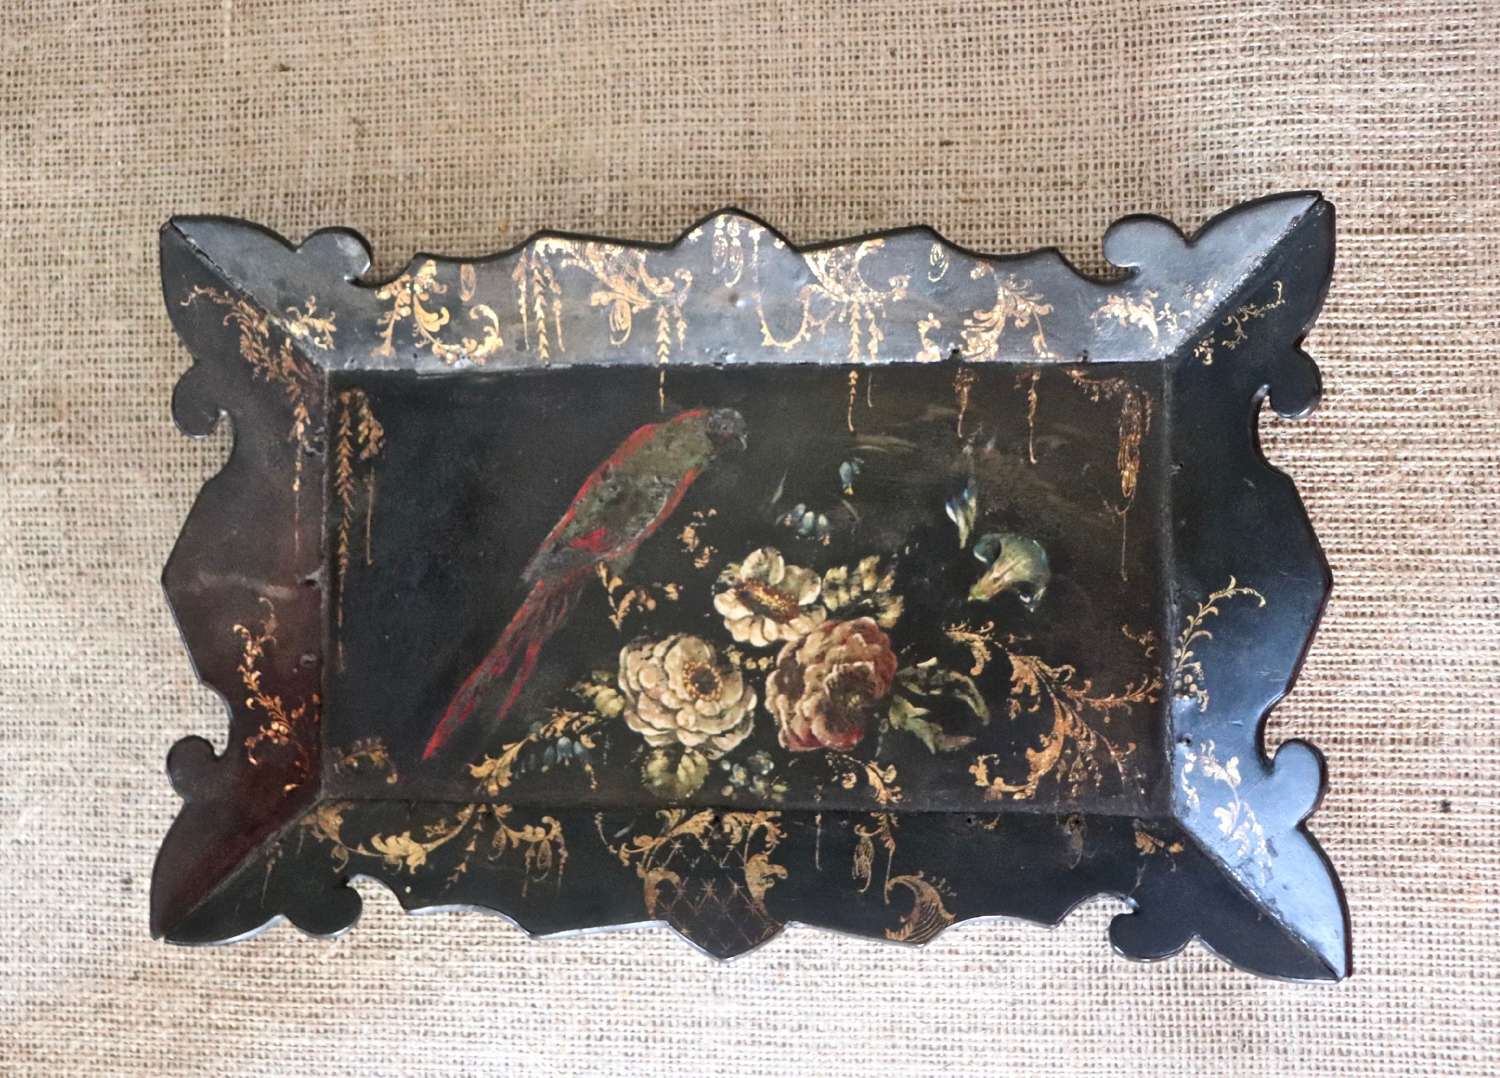 19th century scalloped tray depicting a parrot and flowers